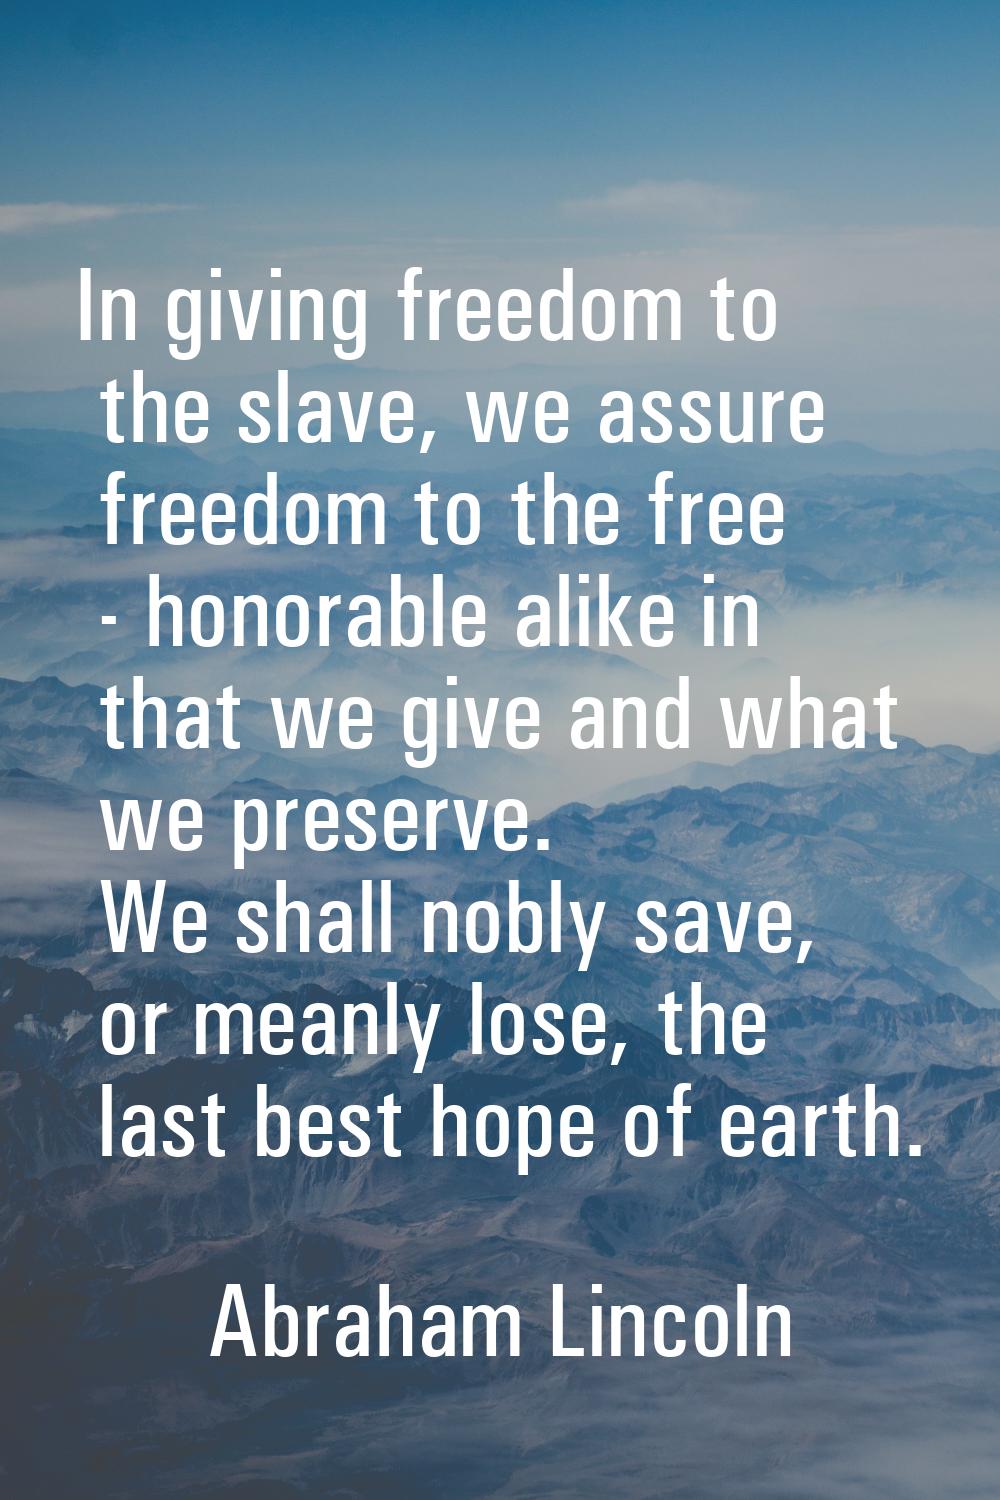 In giving freedom to the slave, we assure freedom to the free - honorable alike in that we give and